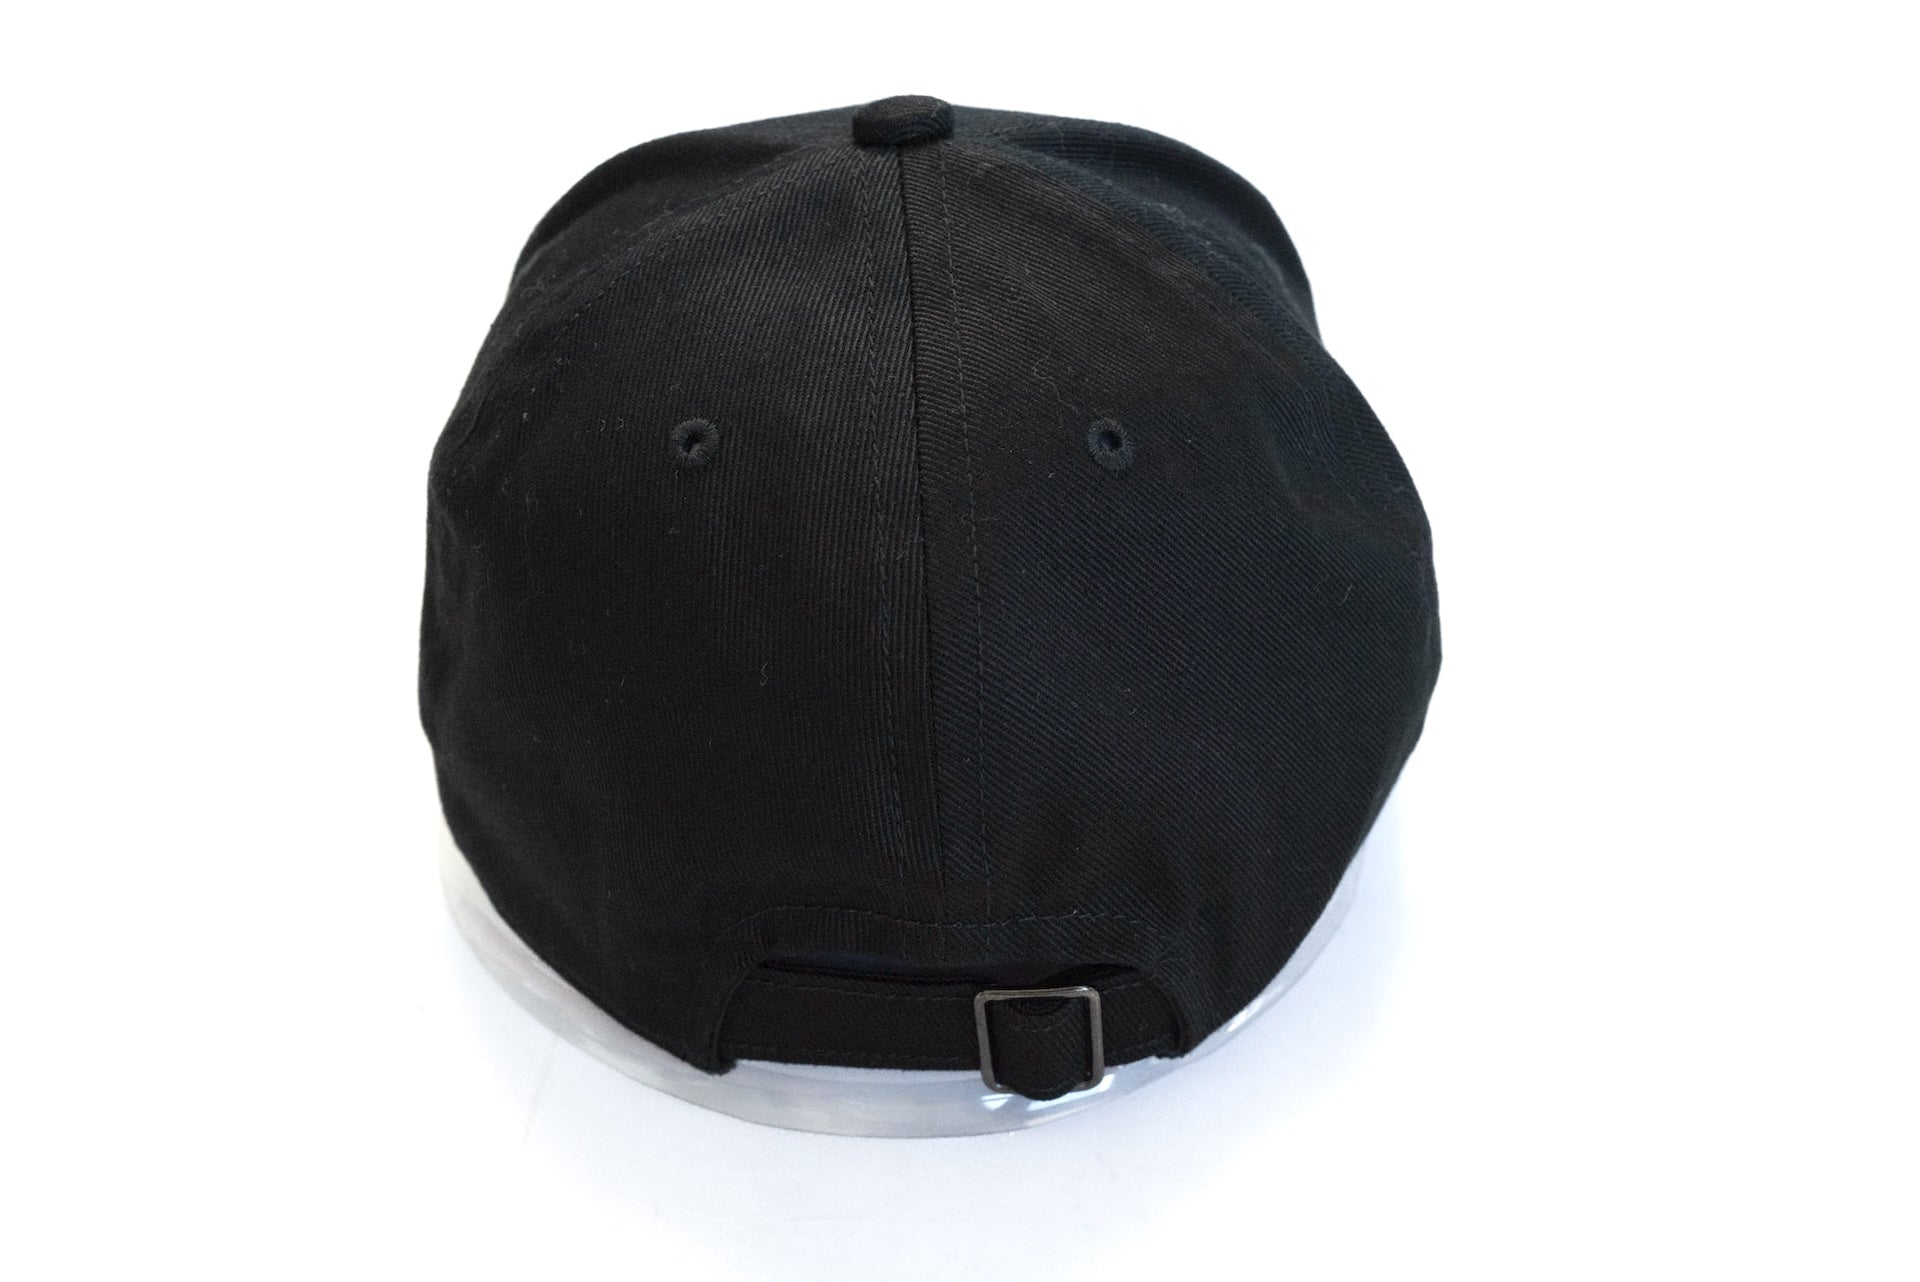 Ultima Thule by Freewheelers "Ancient Monster" Crest Vent Cap (Black)